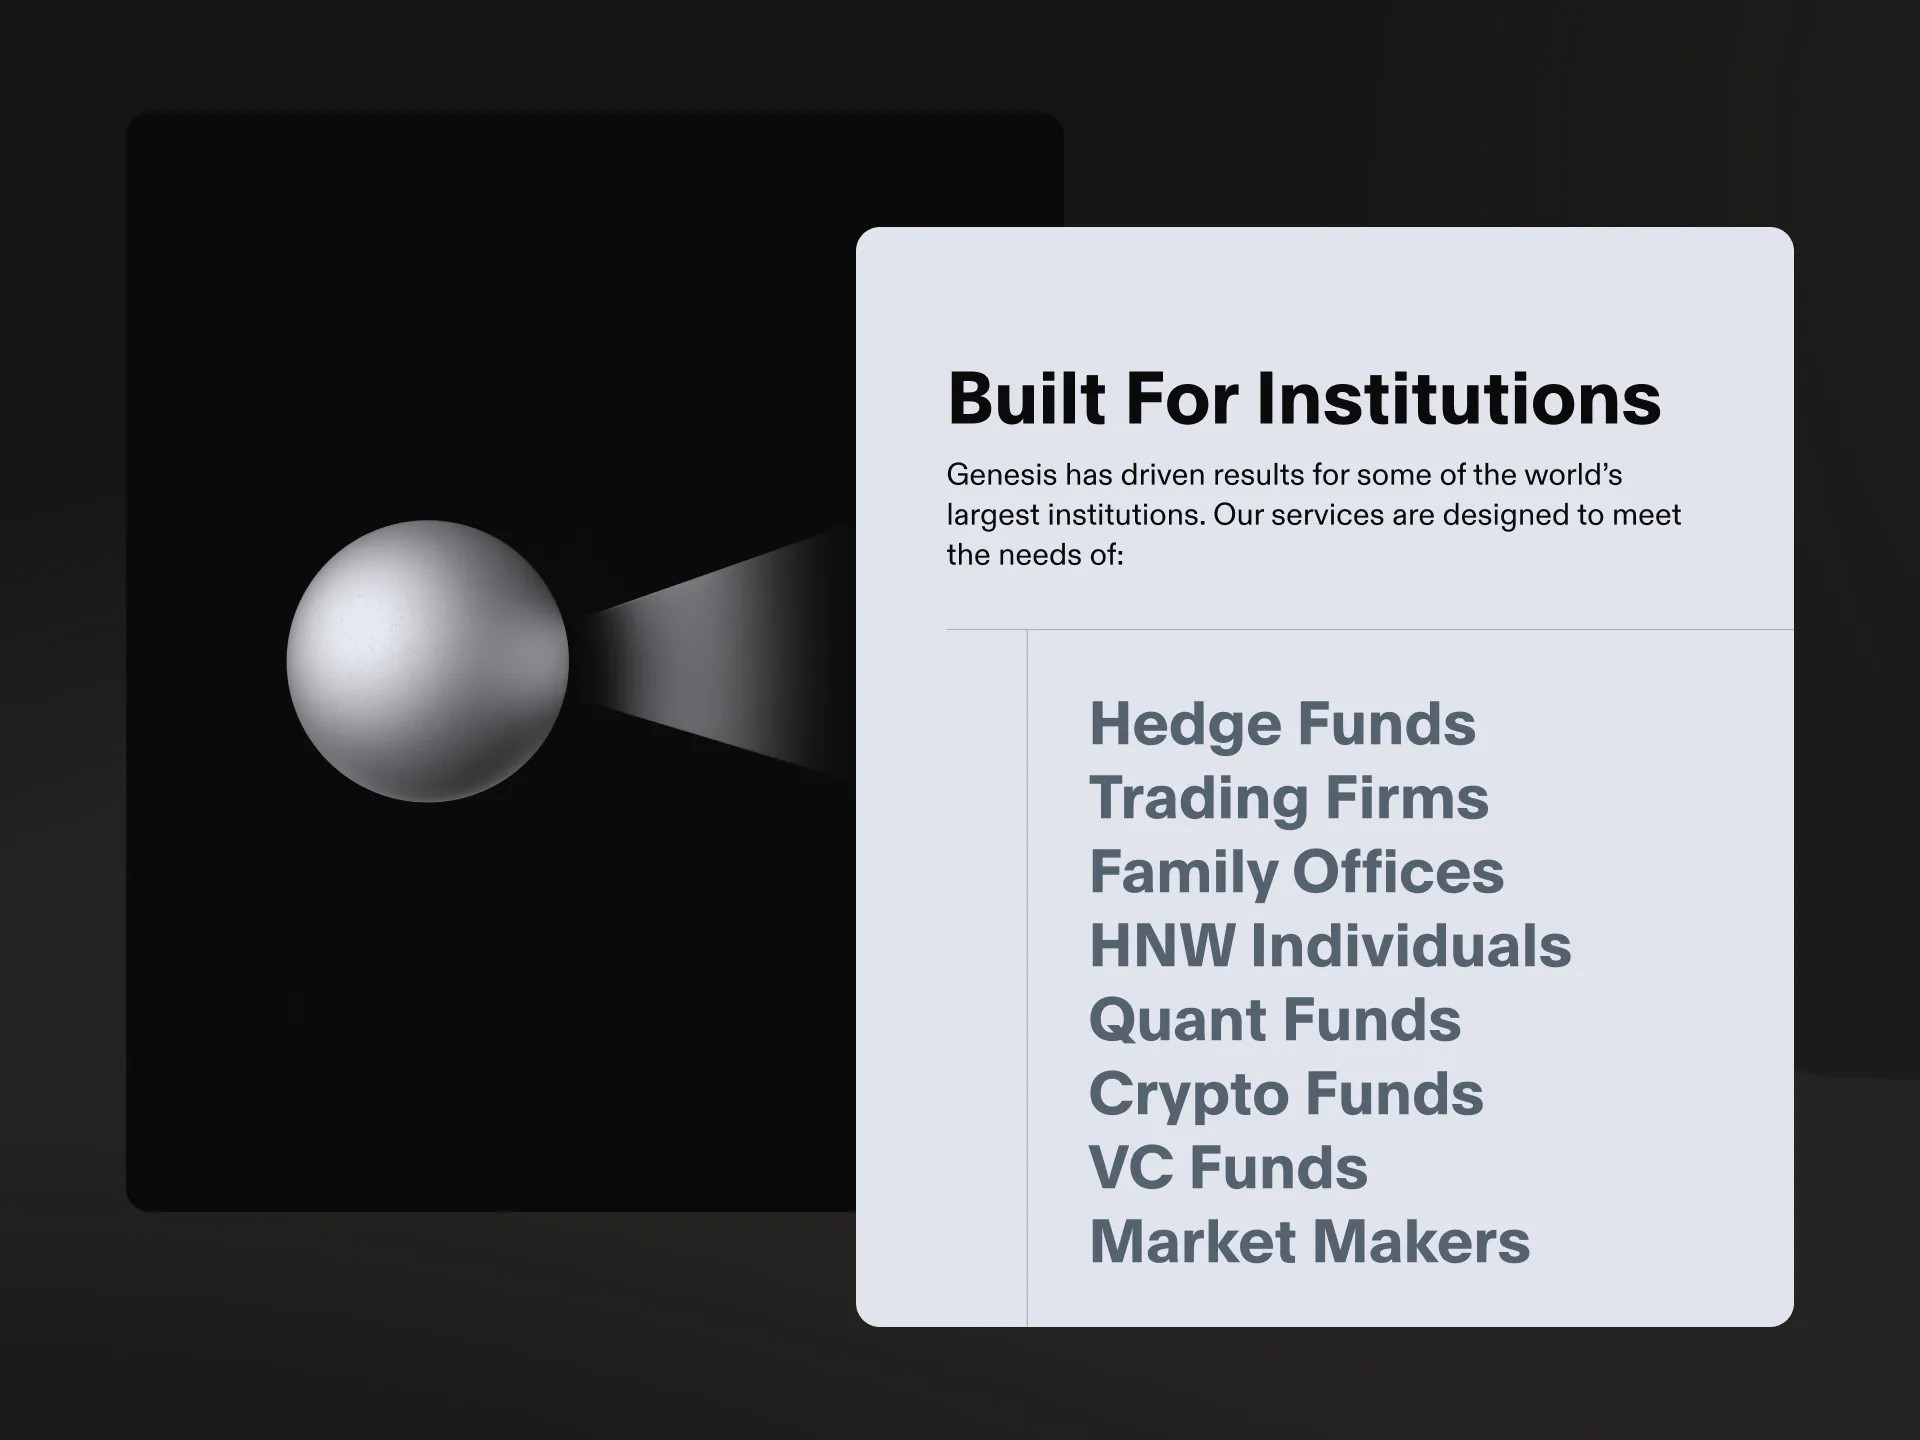 Genesis brand image highlighting services for institutions, listing client types like hedge funds and crypto funds.